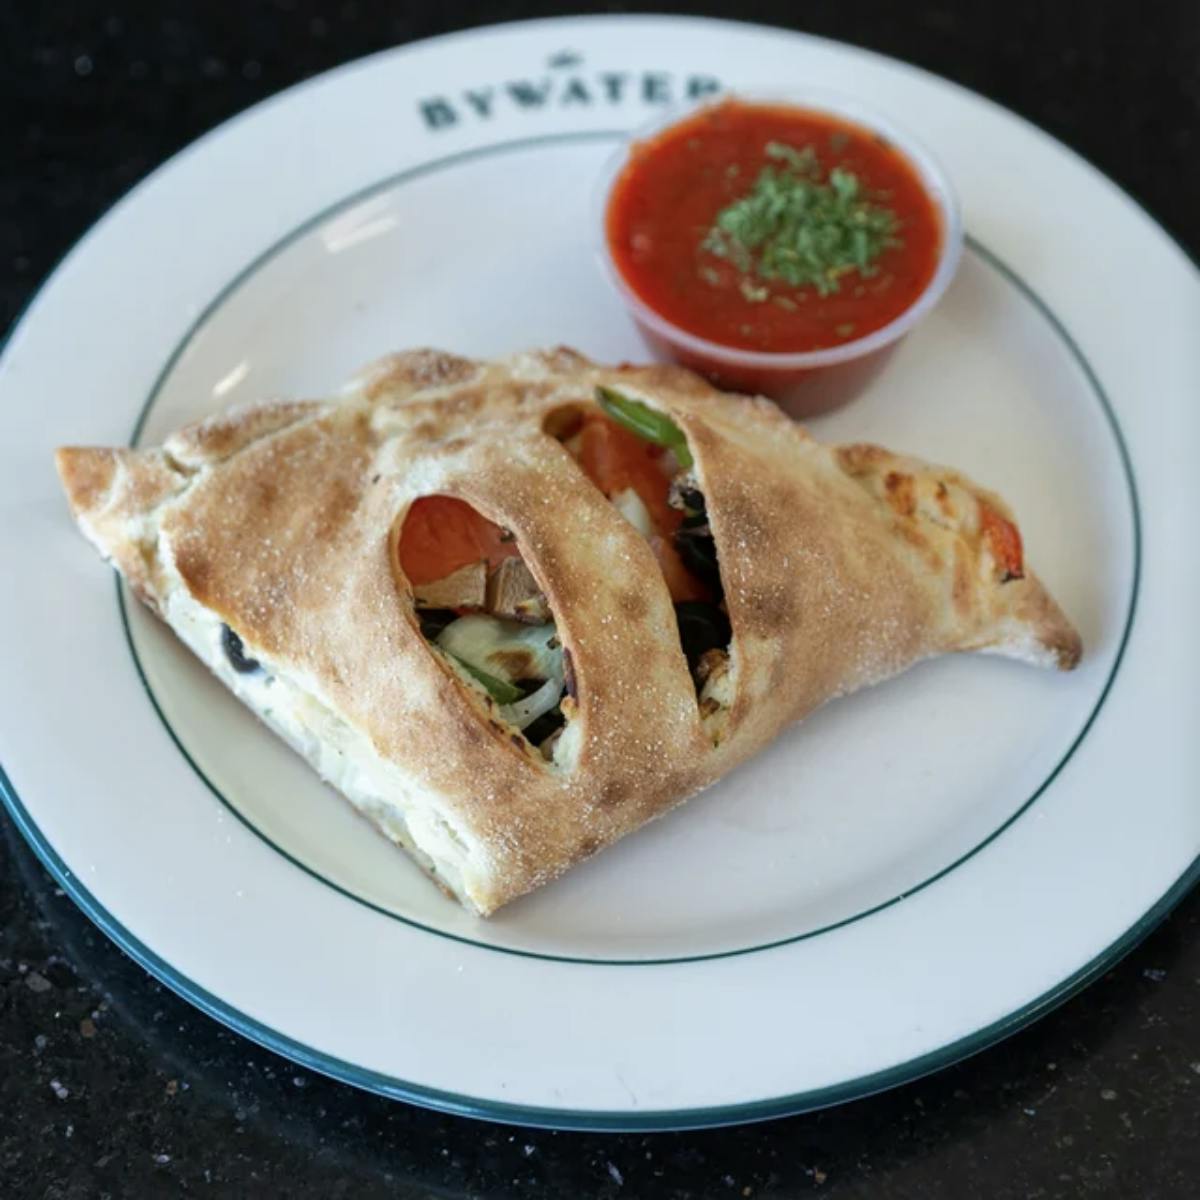 Vegetarian Calzone from Aroma Pizza & Pasta in Lake Forest, CA